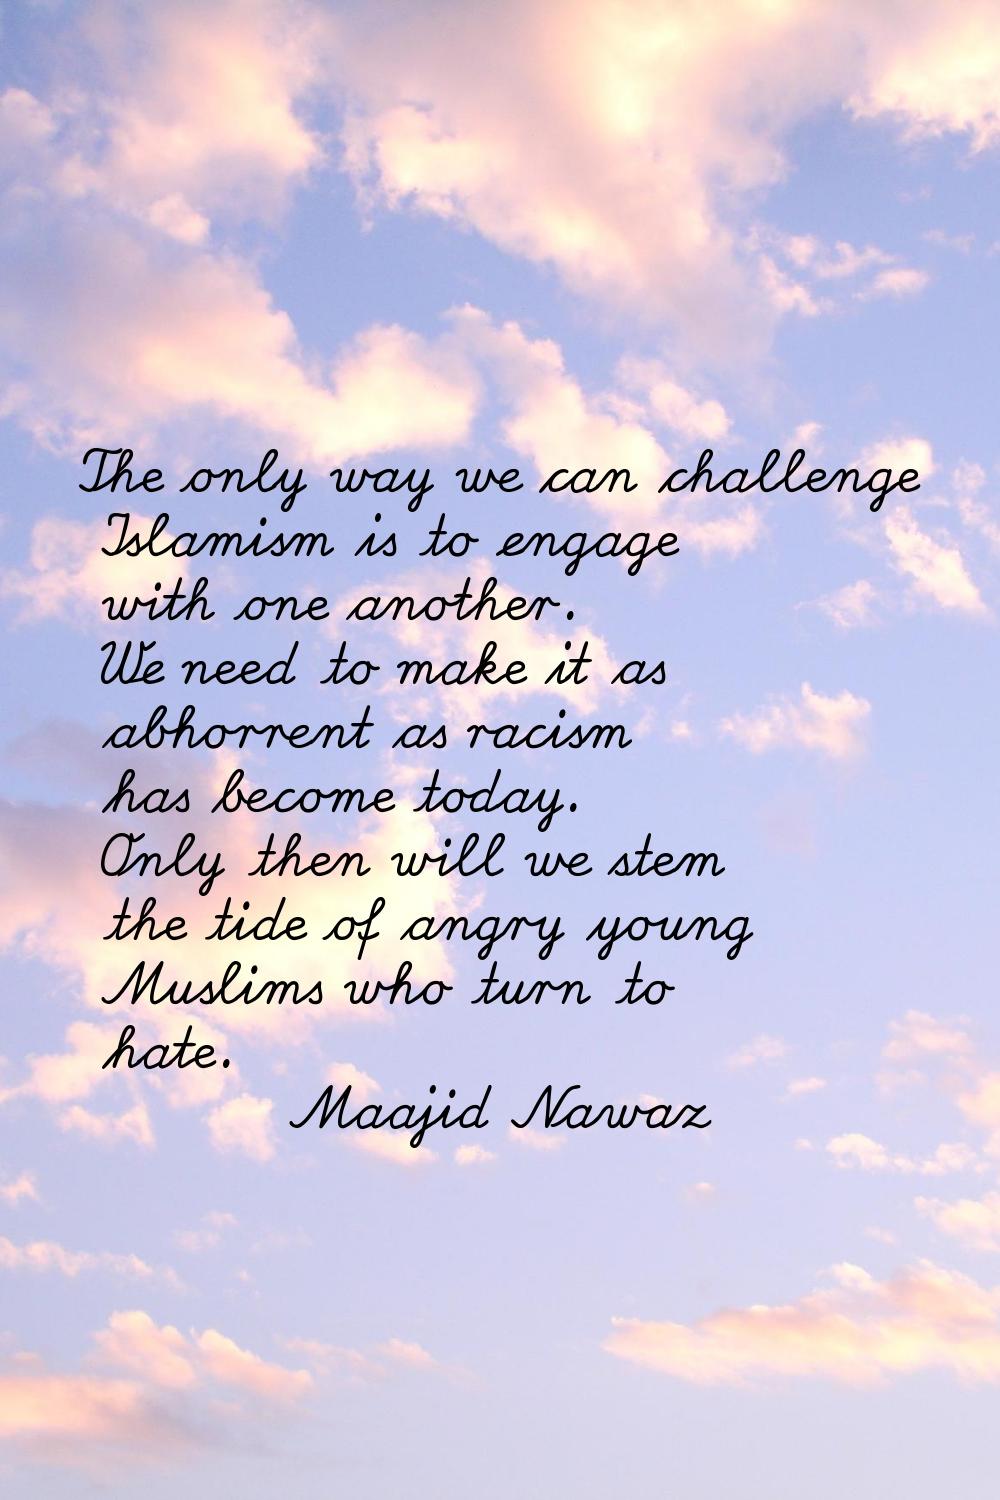 The only way we can challenge Islamism is to engage with one another. We need to make it as abhorre